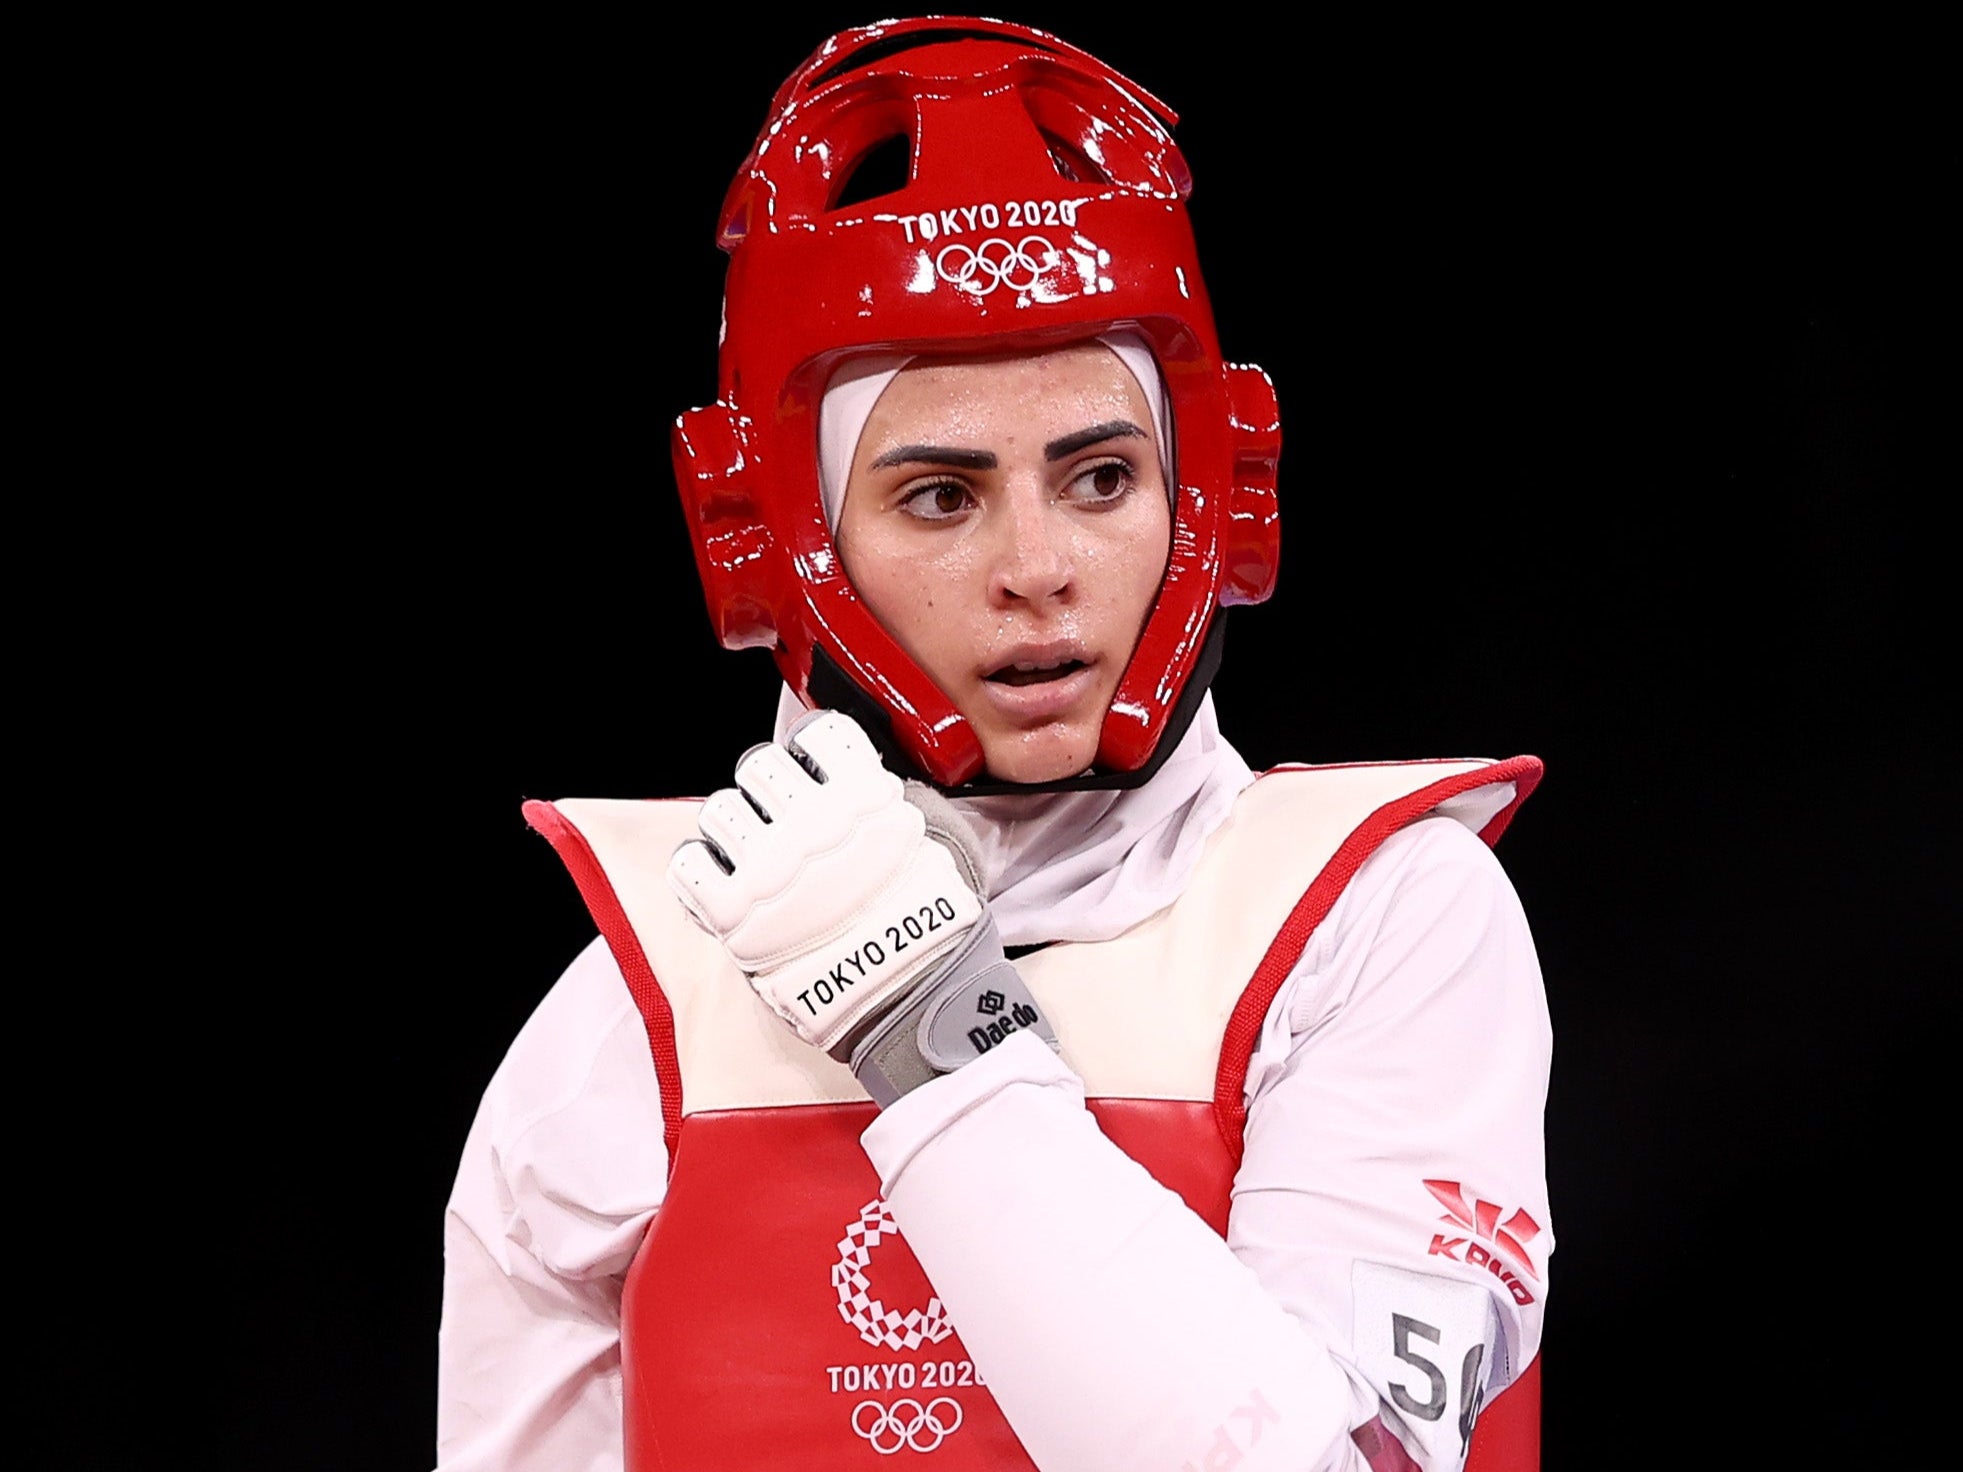 Julyana Al-Sadeq has gone viral for her resemblance to Lady Gaga during the Tokyo Olympics.